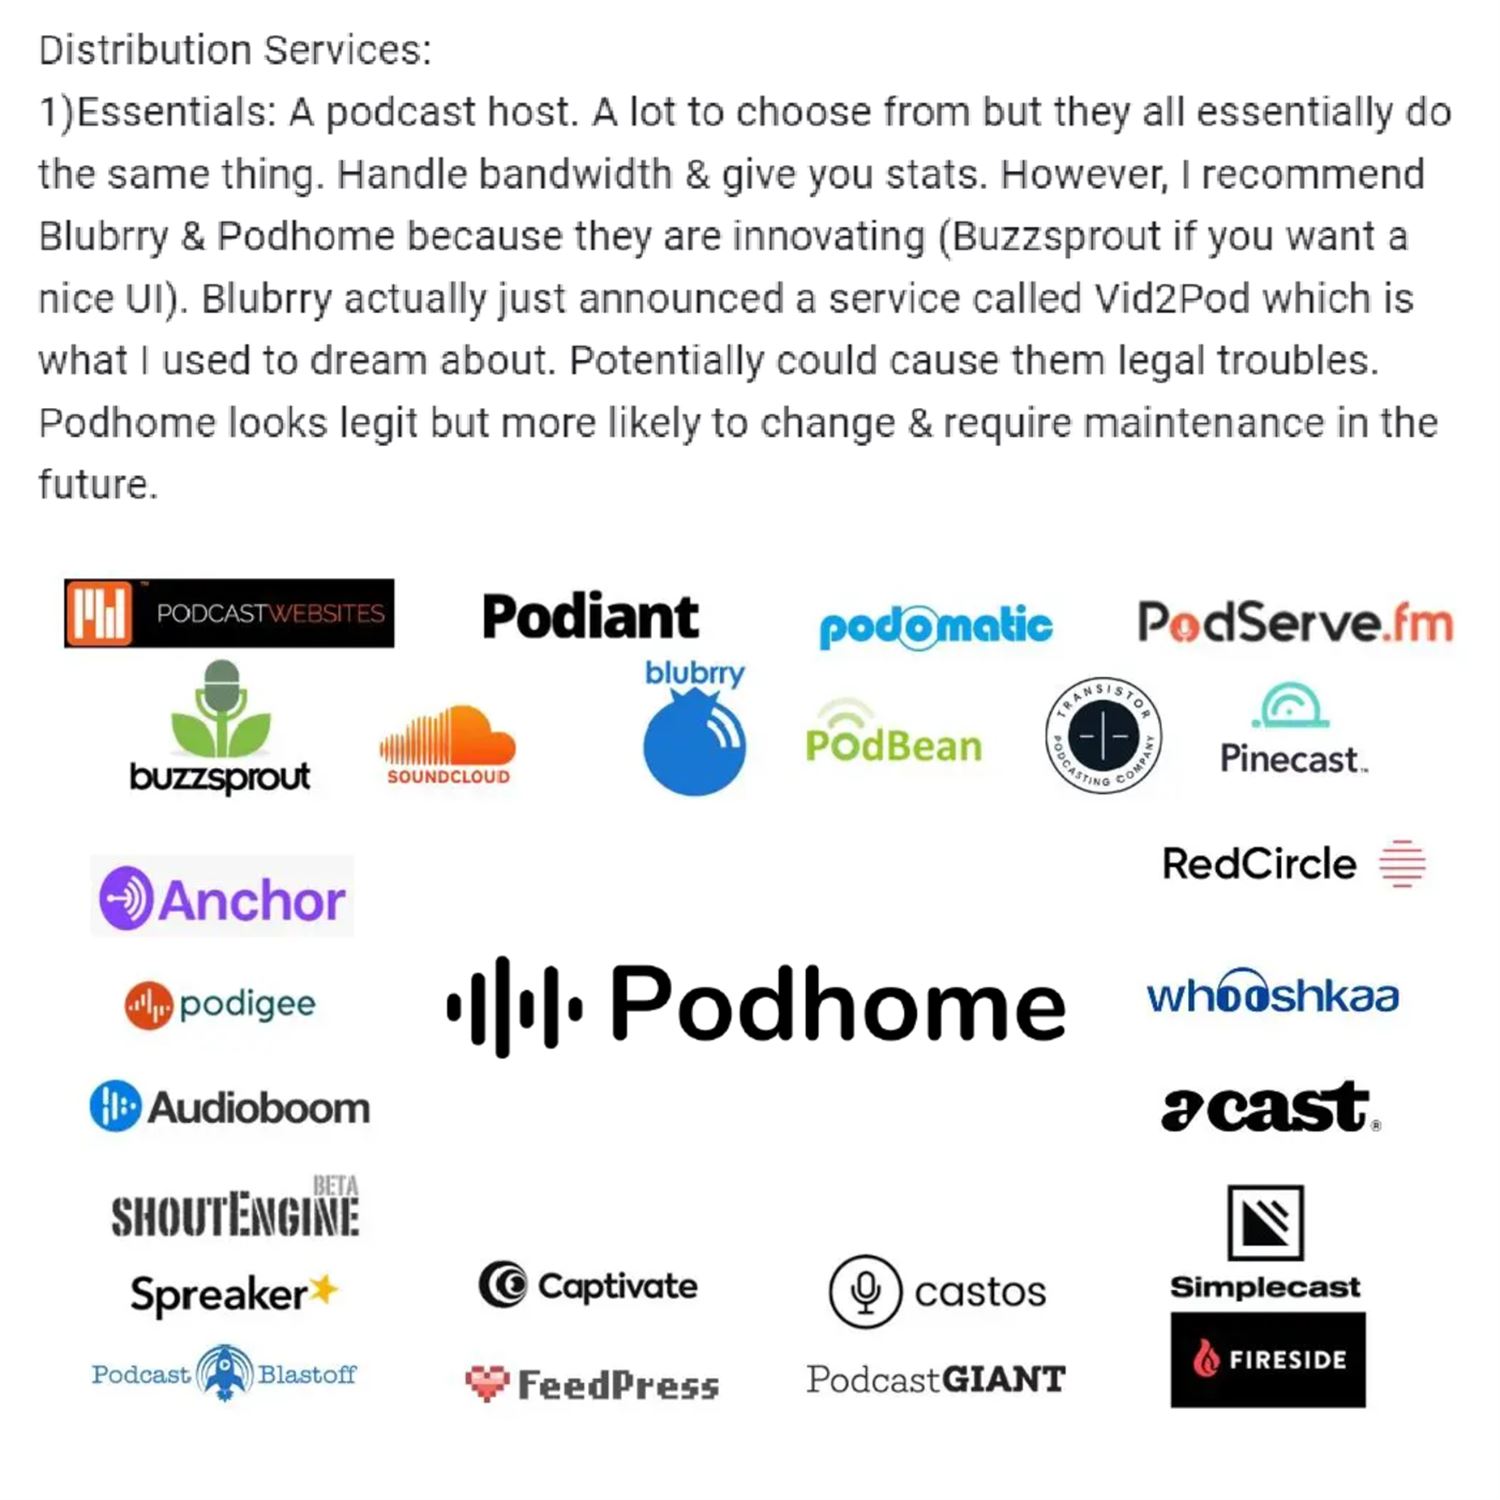 Essential distribution services: a podcast host